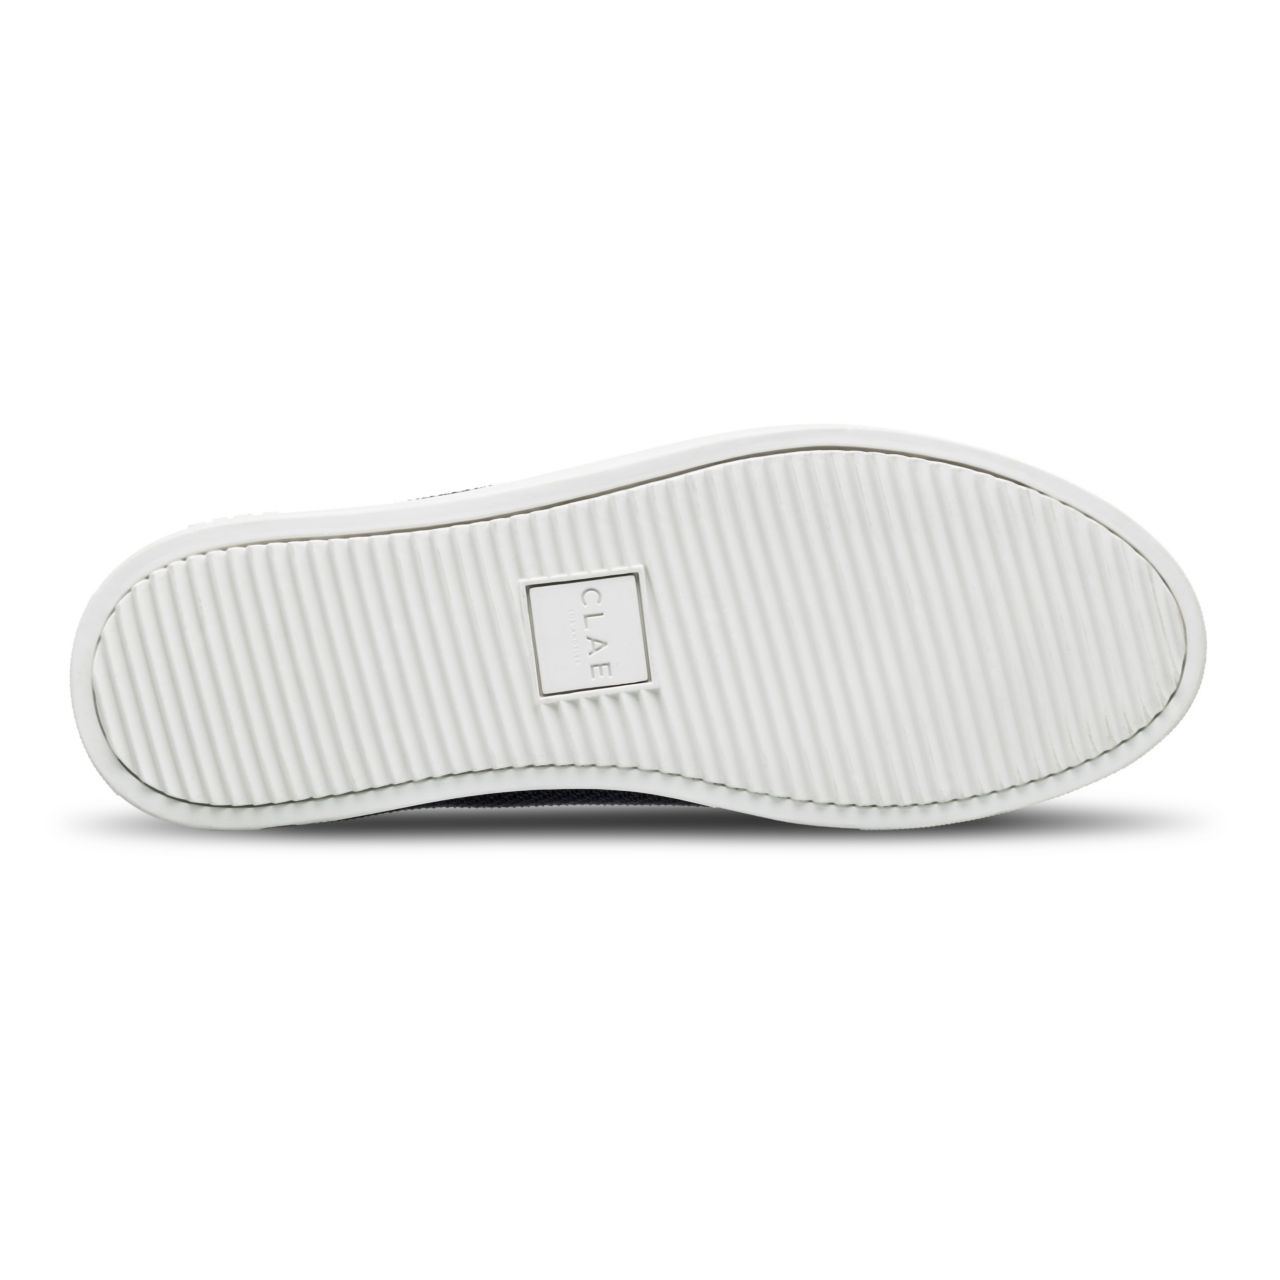 Clae Bradley Knit Sneakers - NAVY WHITE image number 5